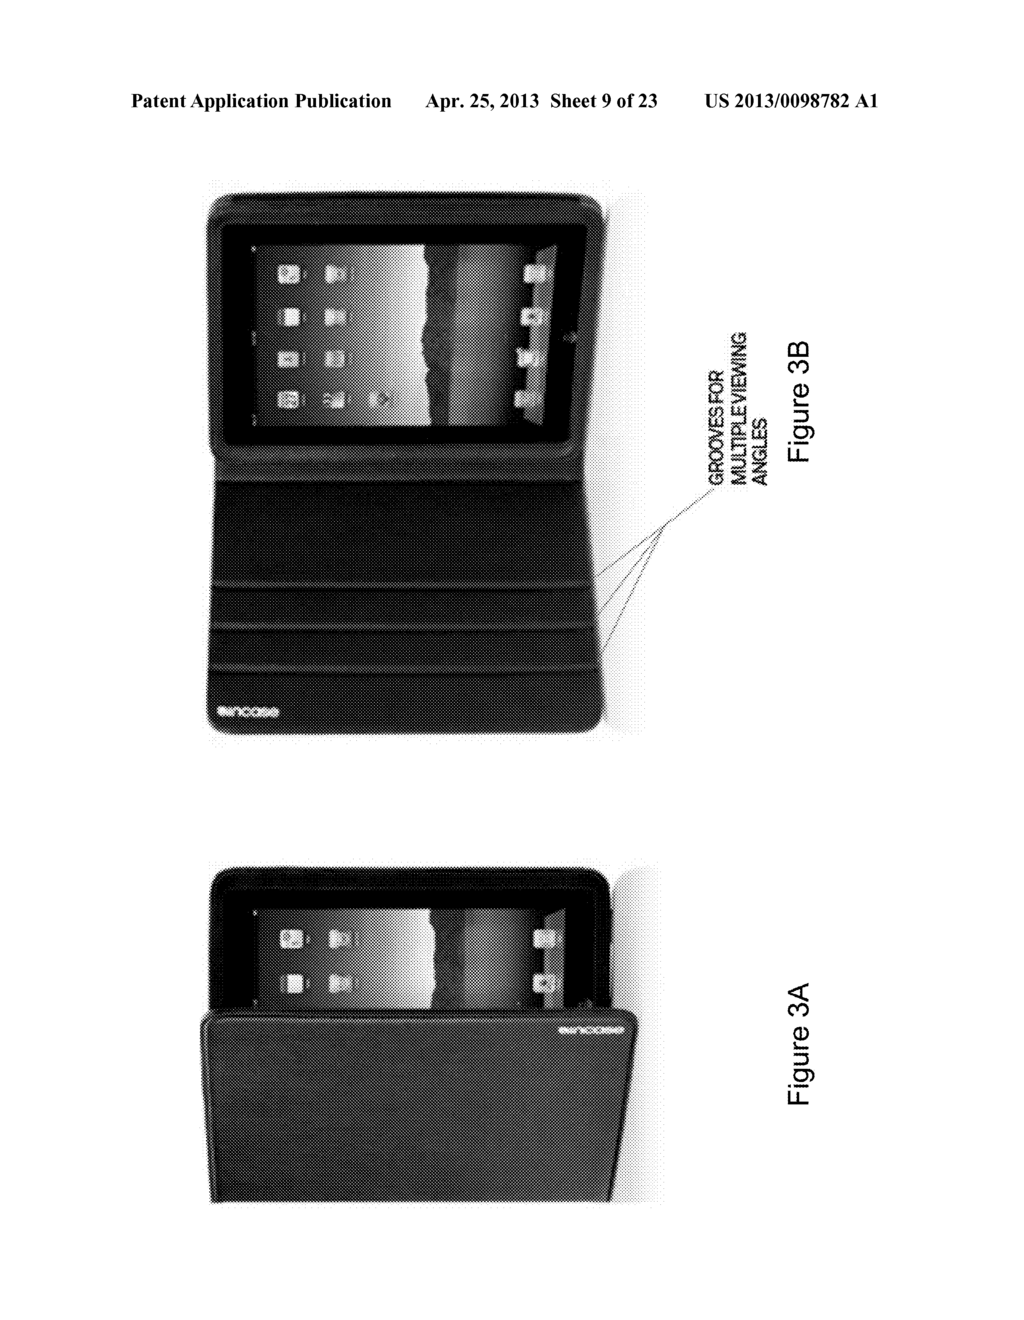 Protective Cover for Electronic Tablet with Adjustable Viewing Stand - diagram, schematic, and image 10